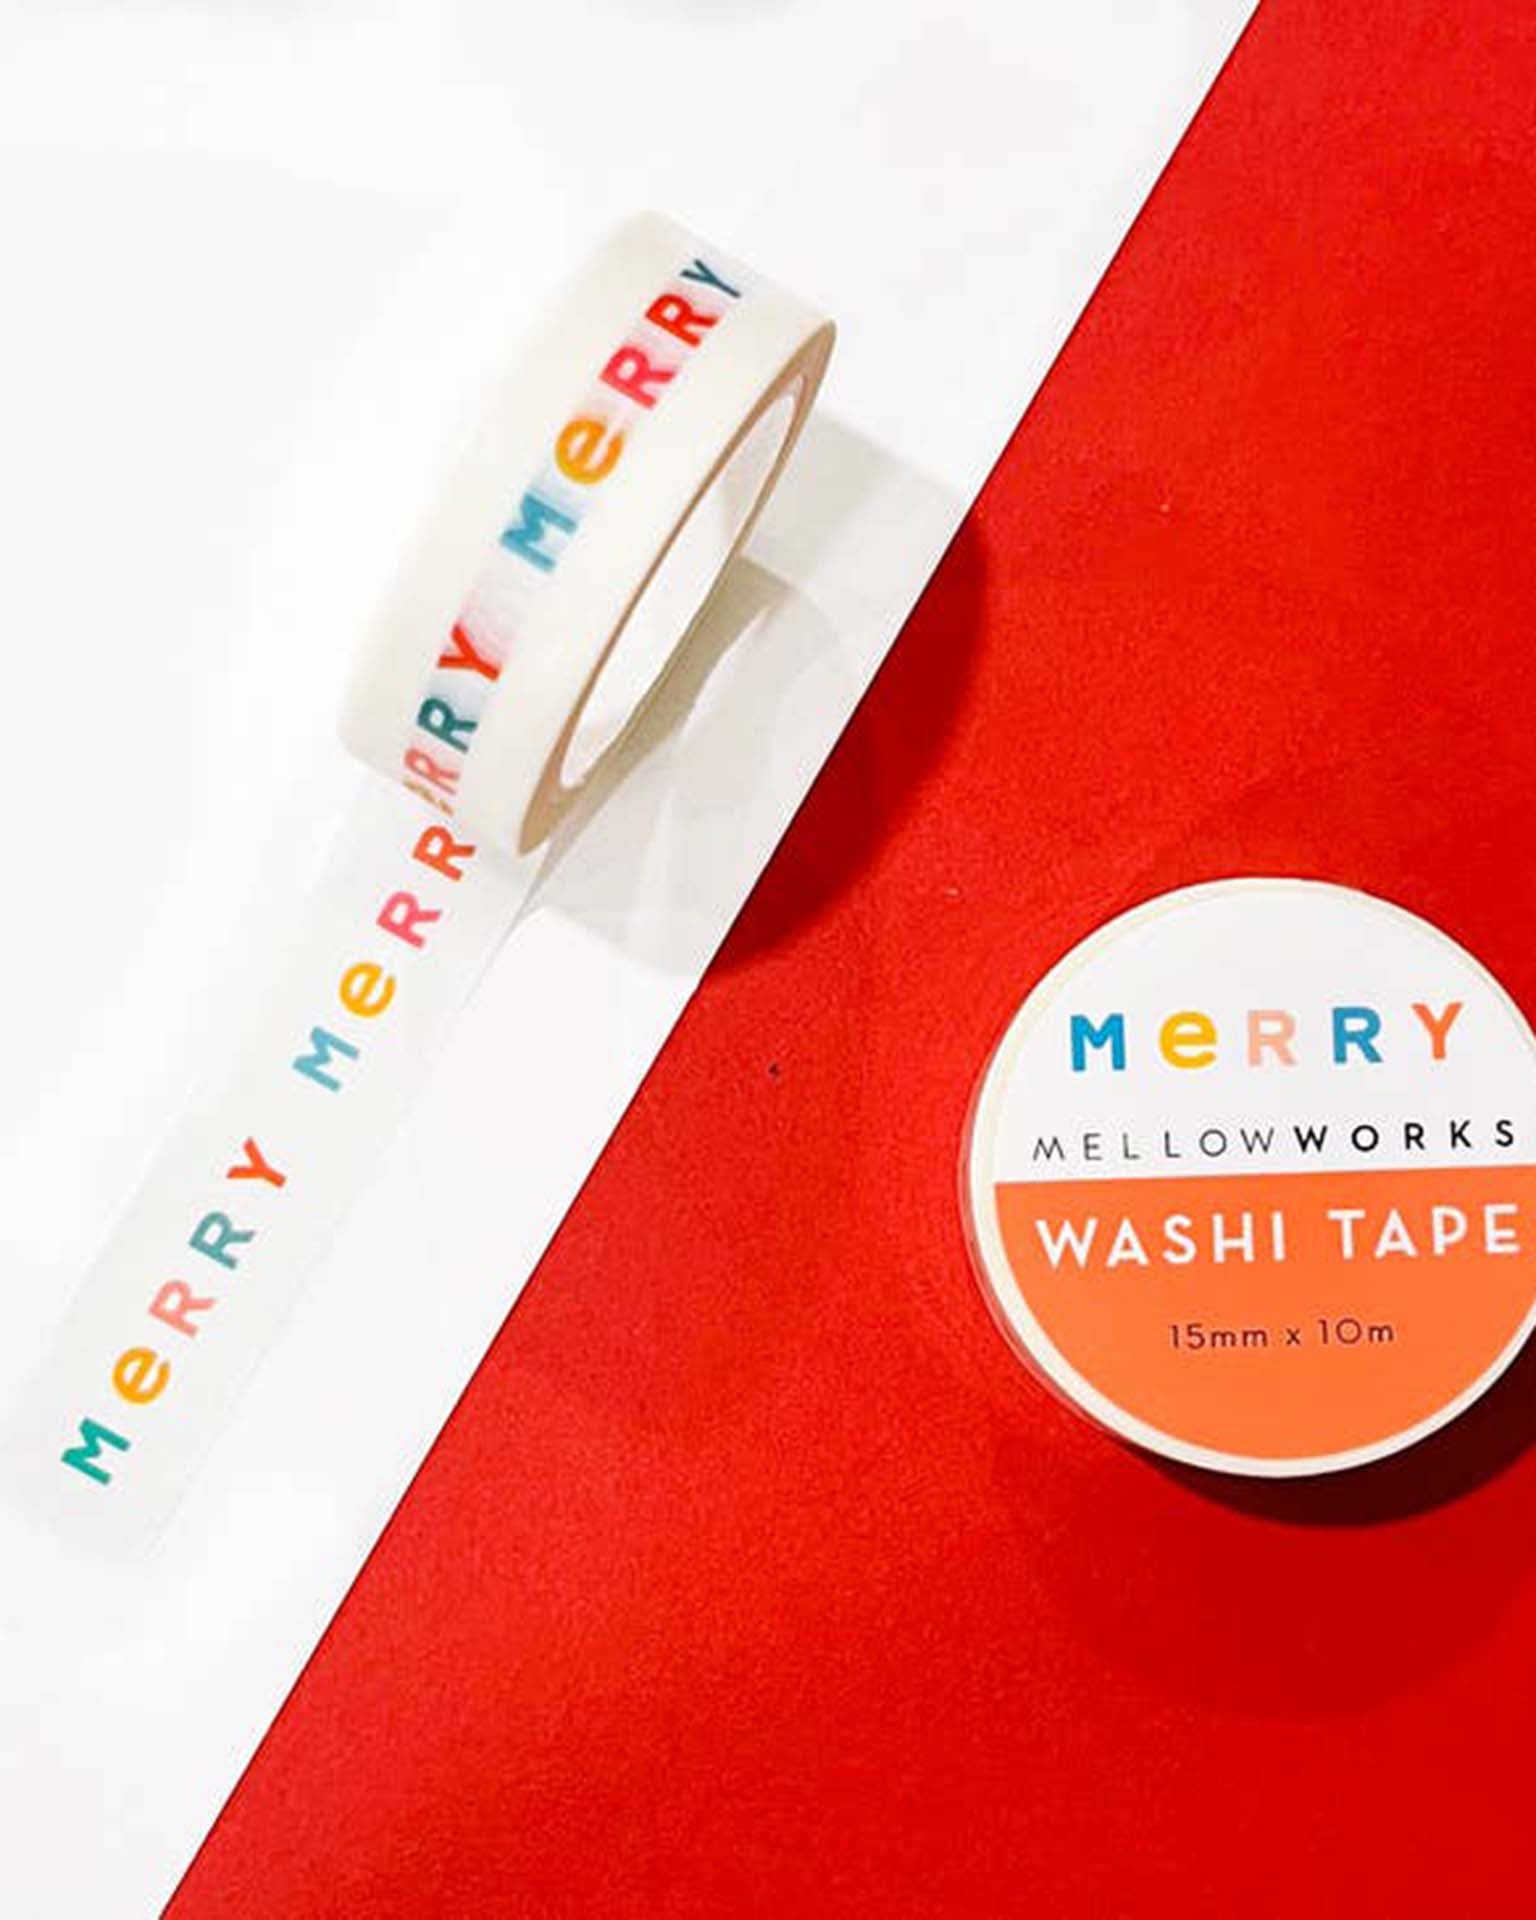 Little mellowworks Party merry merry holiday washi tape